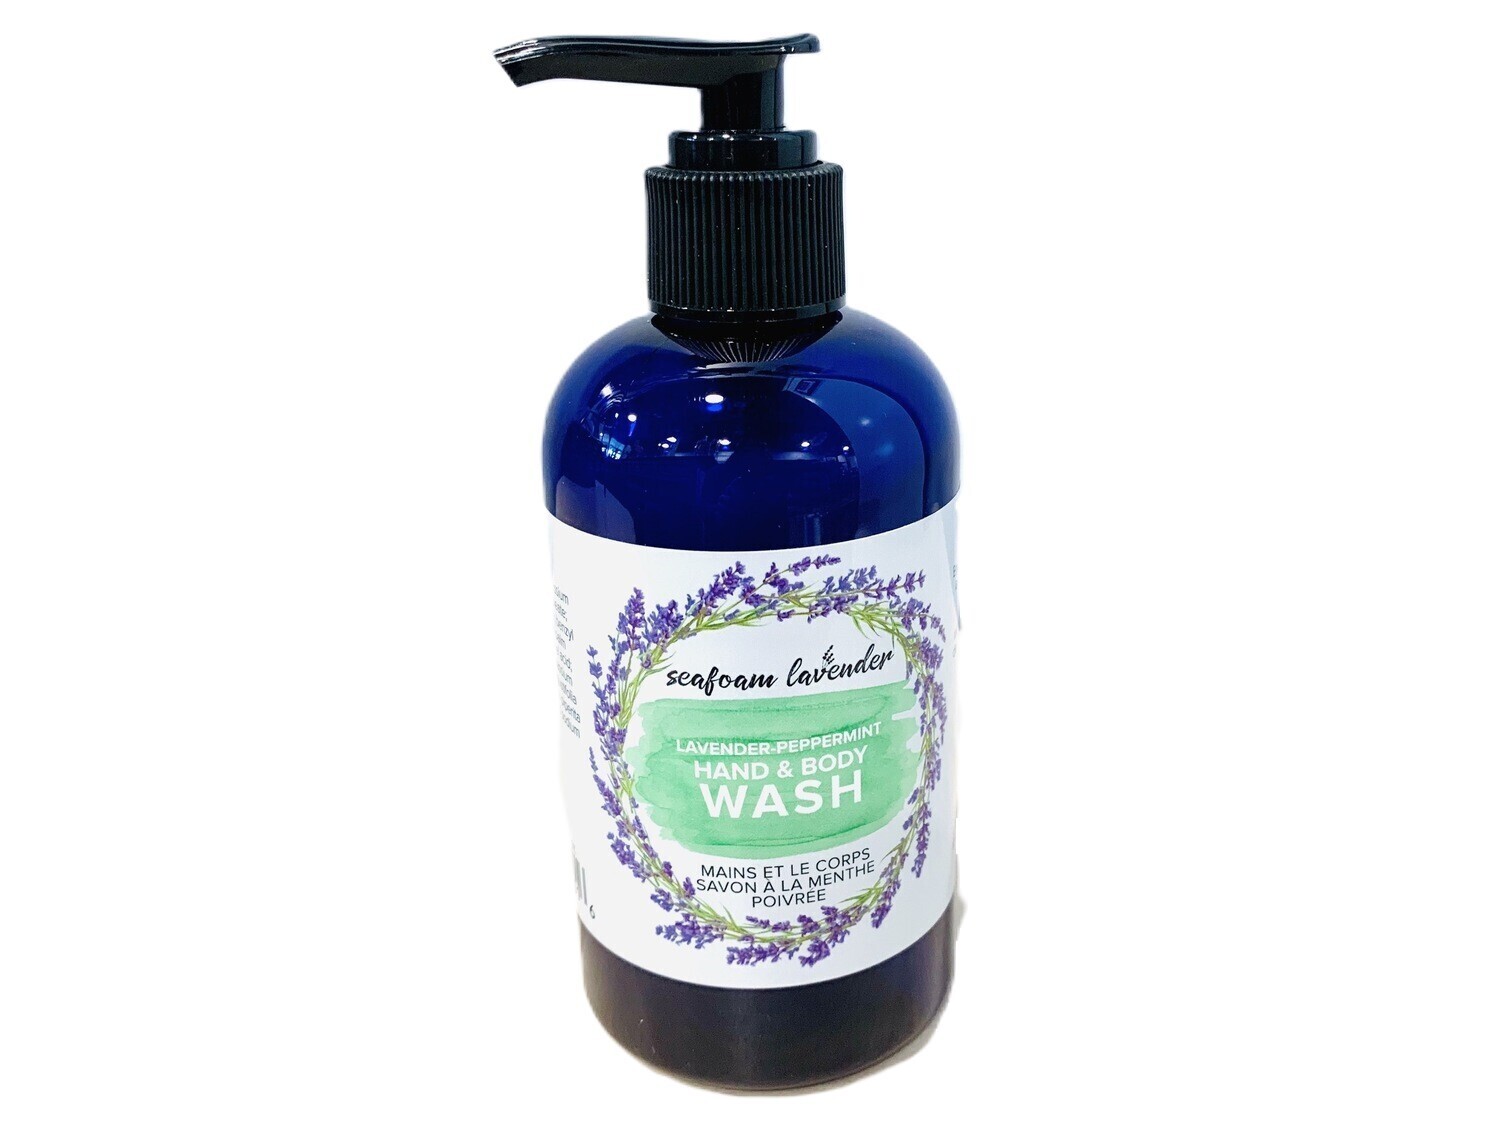 Lavender and Peppermint Hand and Body Wash- Seafoam Lavender 